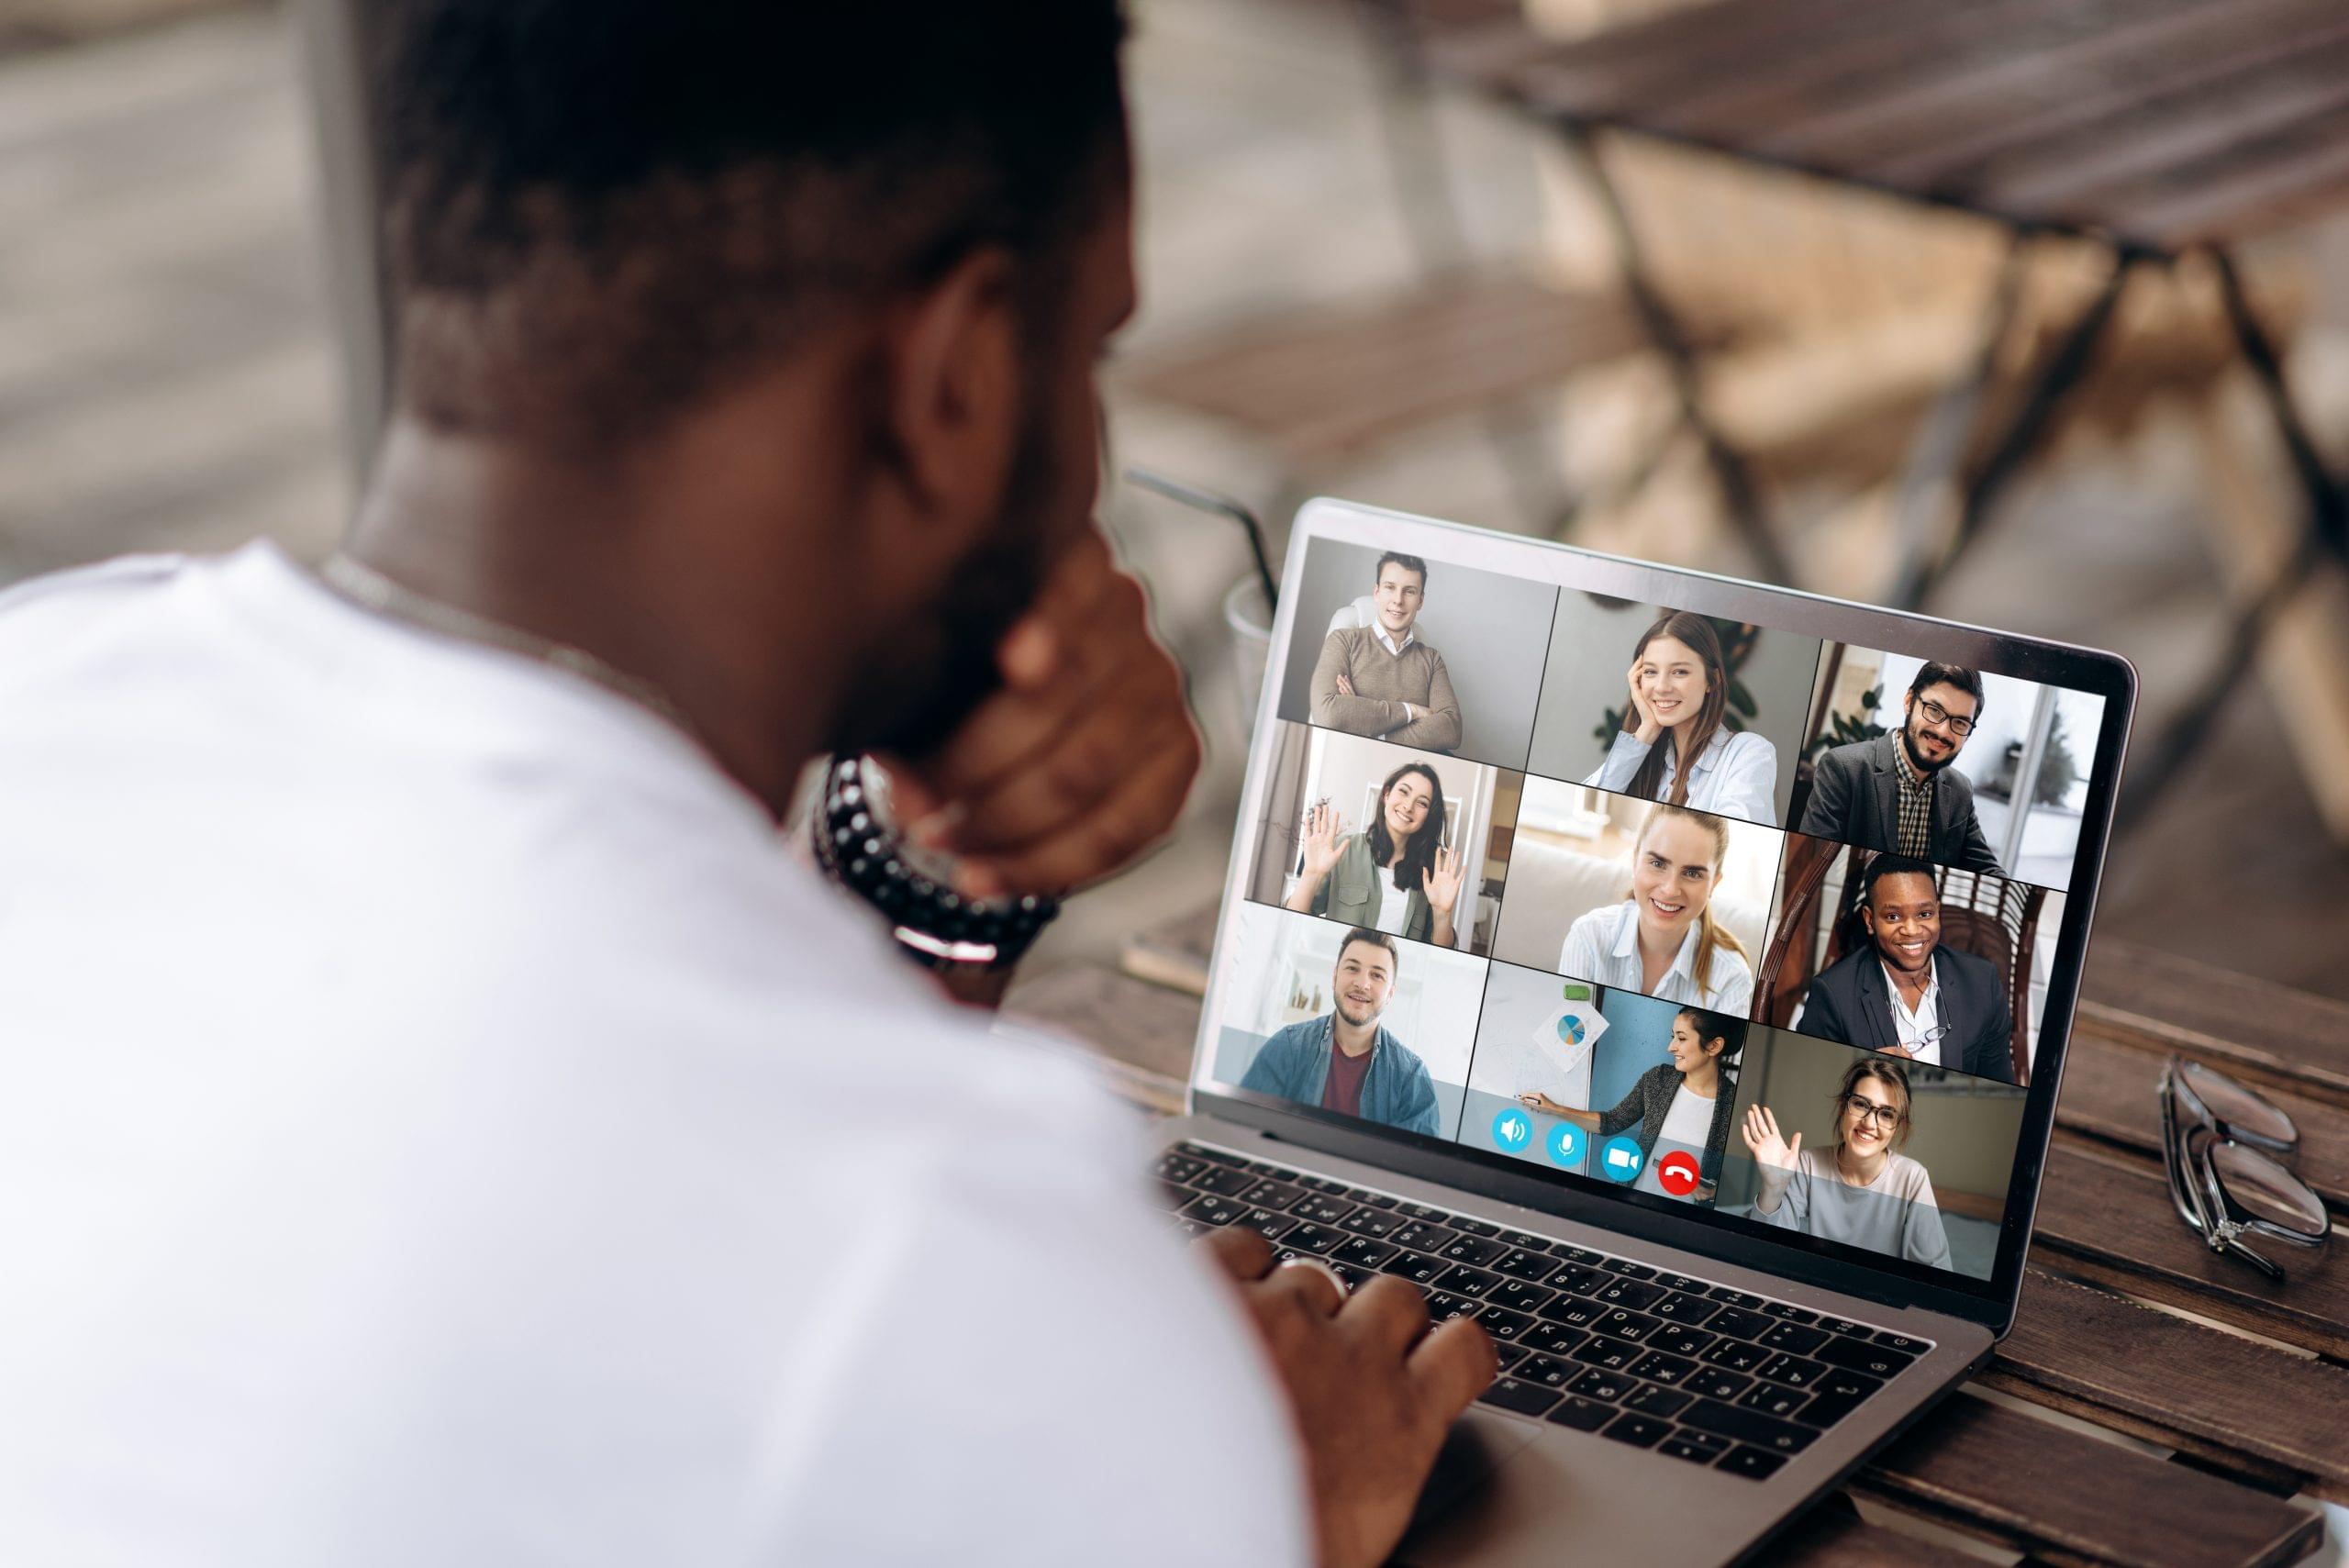 Digital employee experience as brave releases new private video conferencing software.